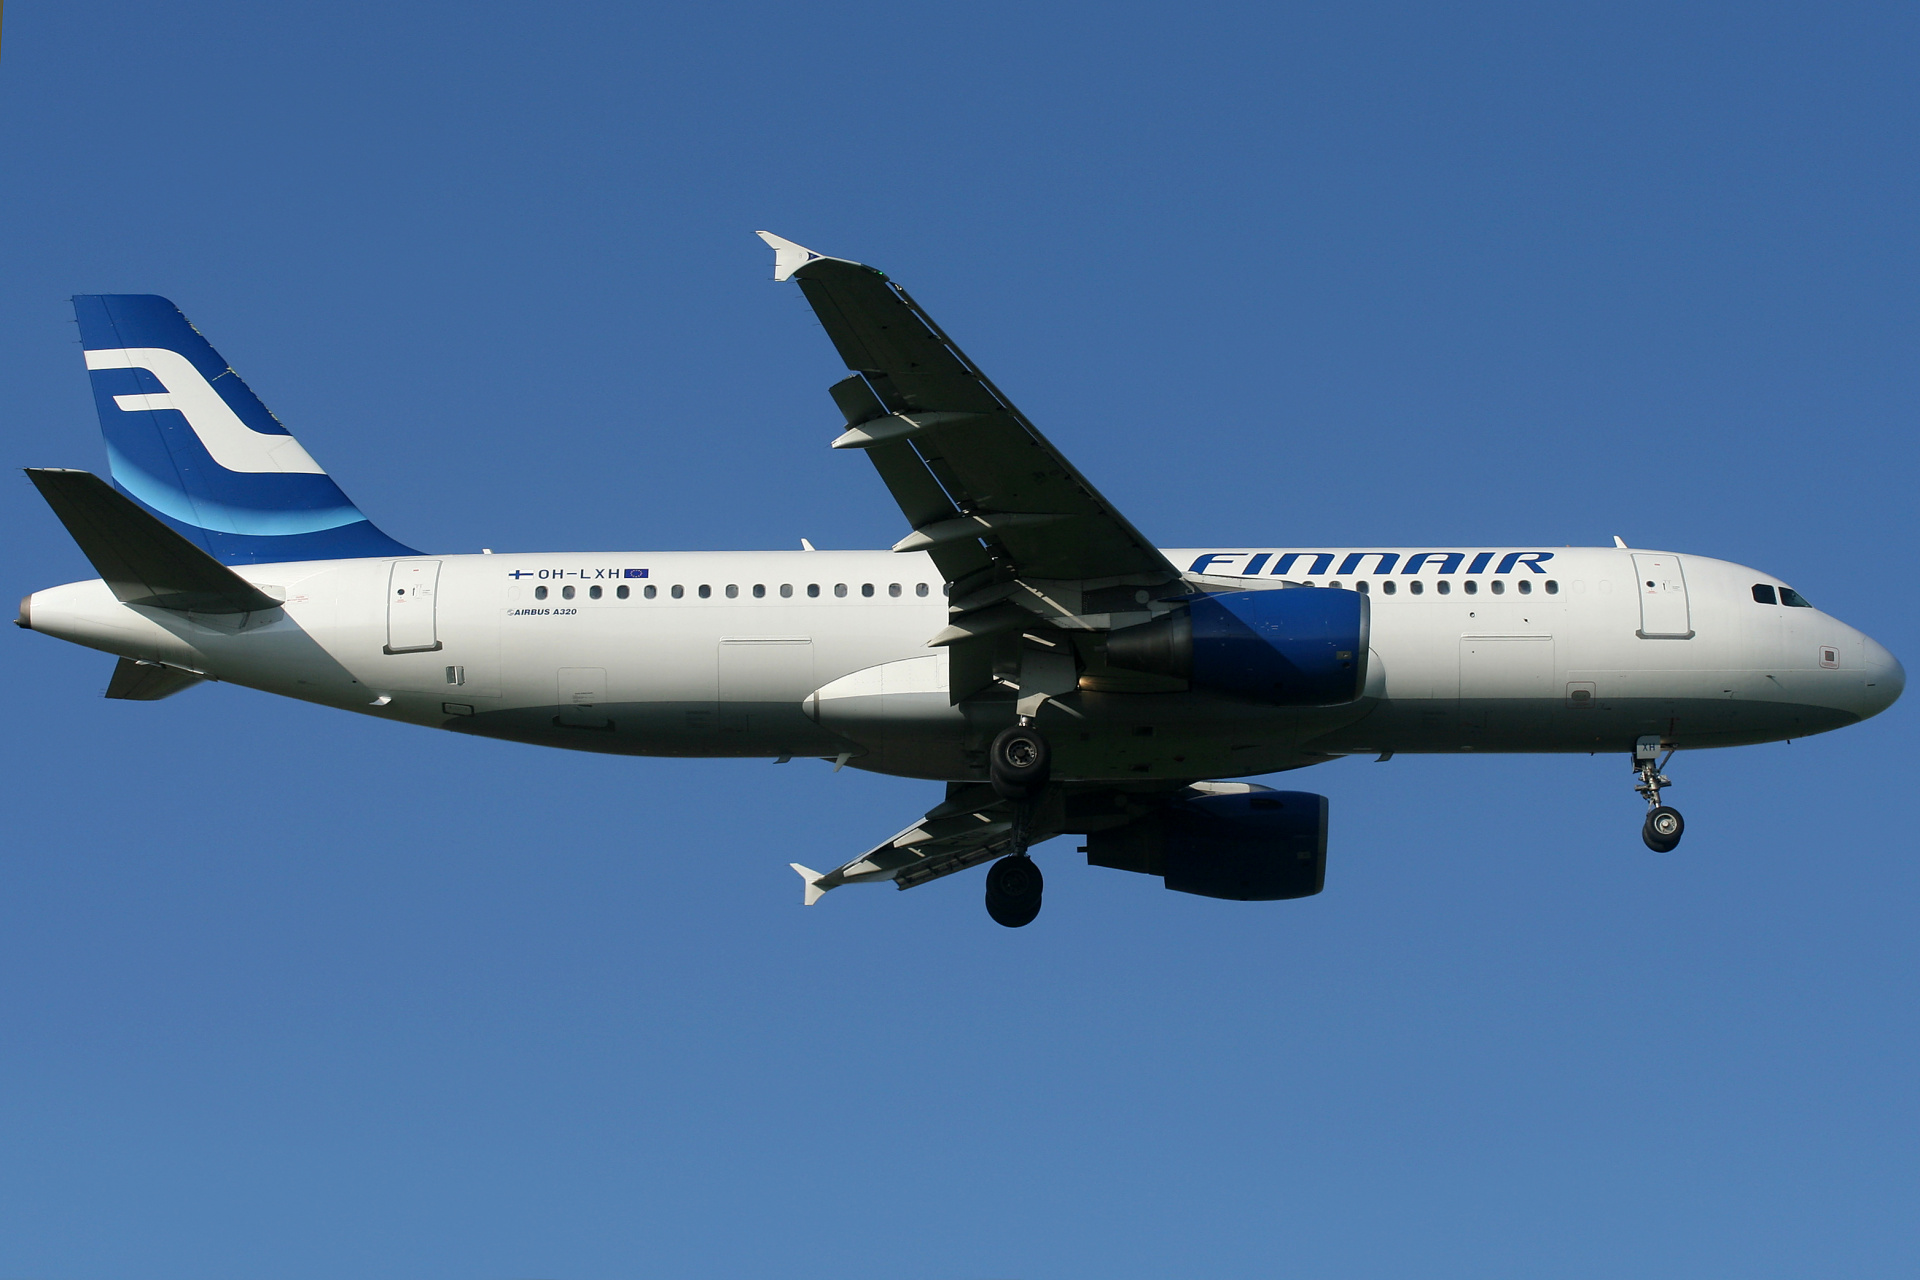 OH-LXK, Finnair (Aircraft » EPWA Spotting » Airbus A320-200)